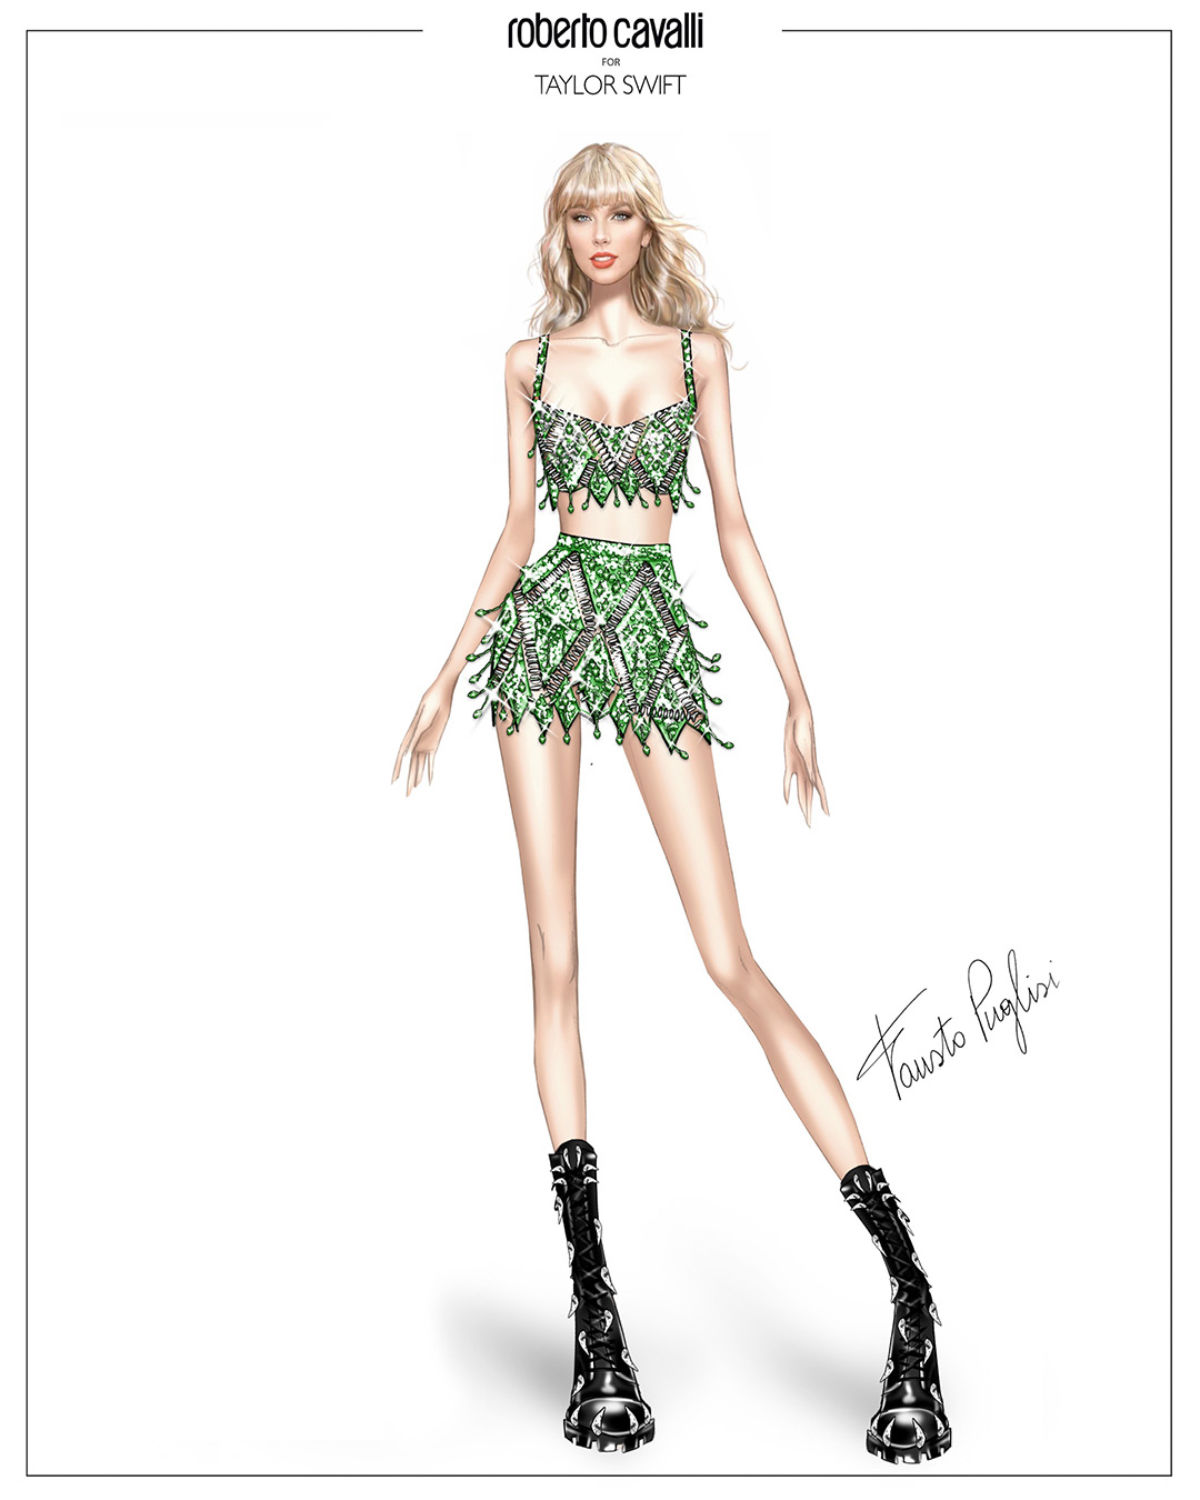 Roberto Cavalli Continues The Collaboration With Taylor Swift’s The Eras Tour